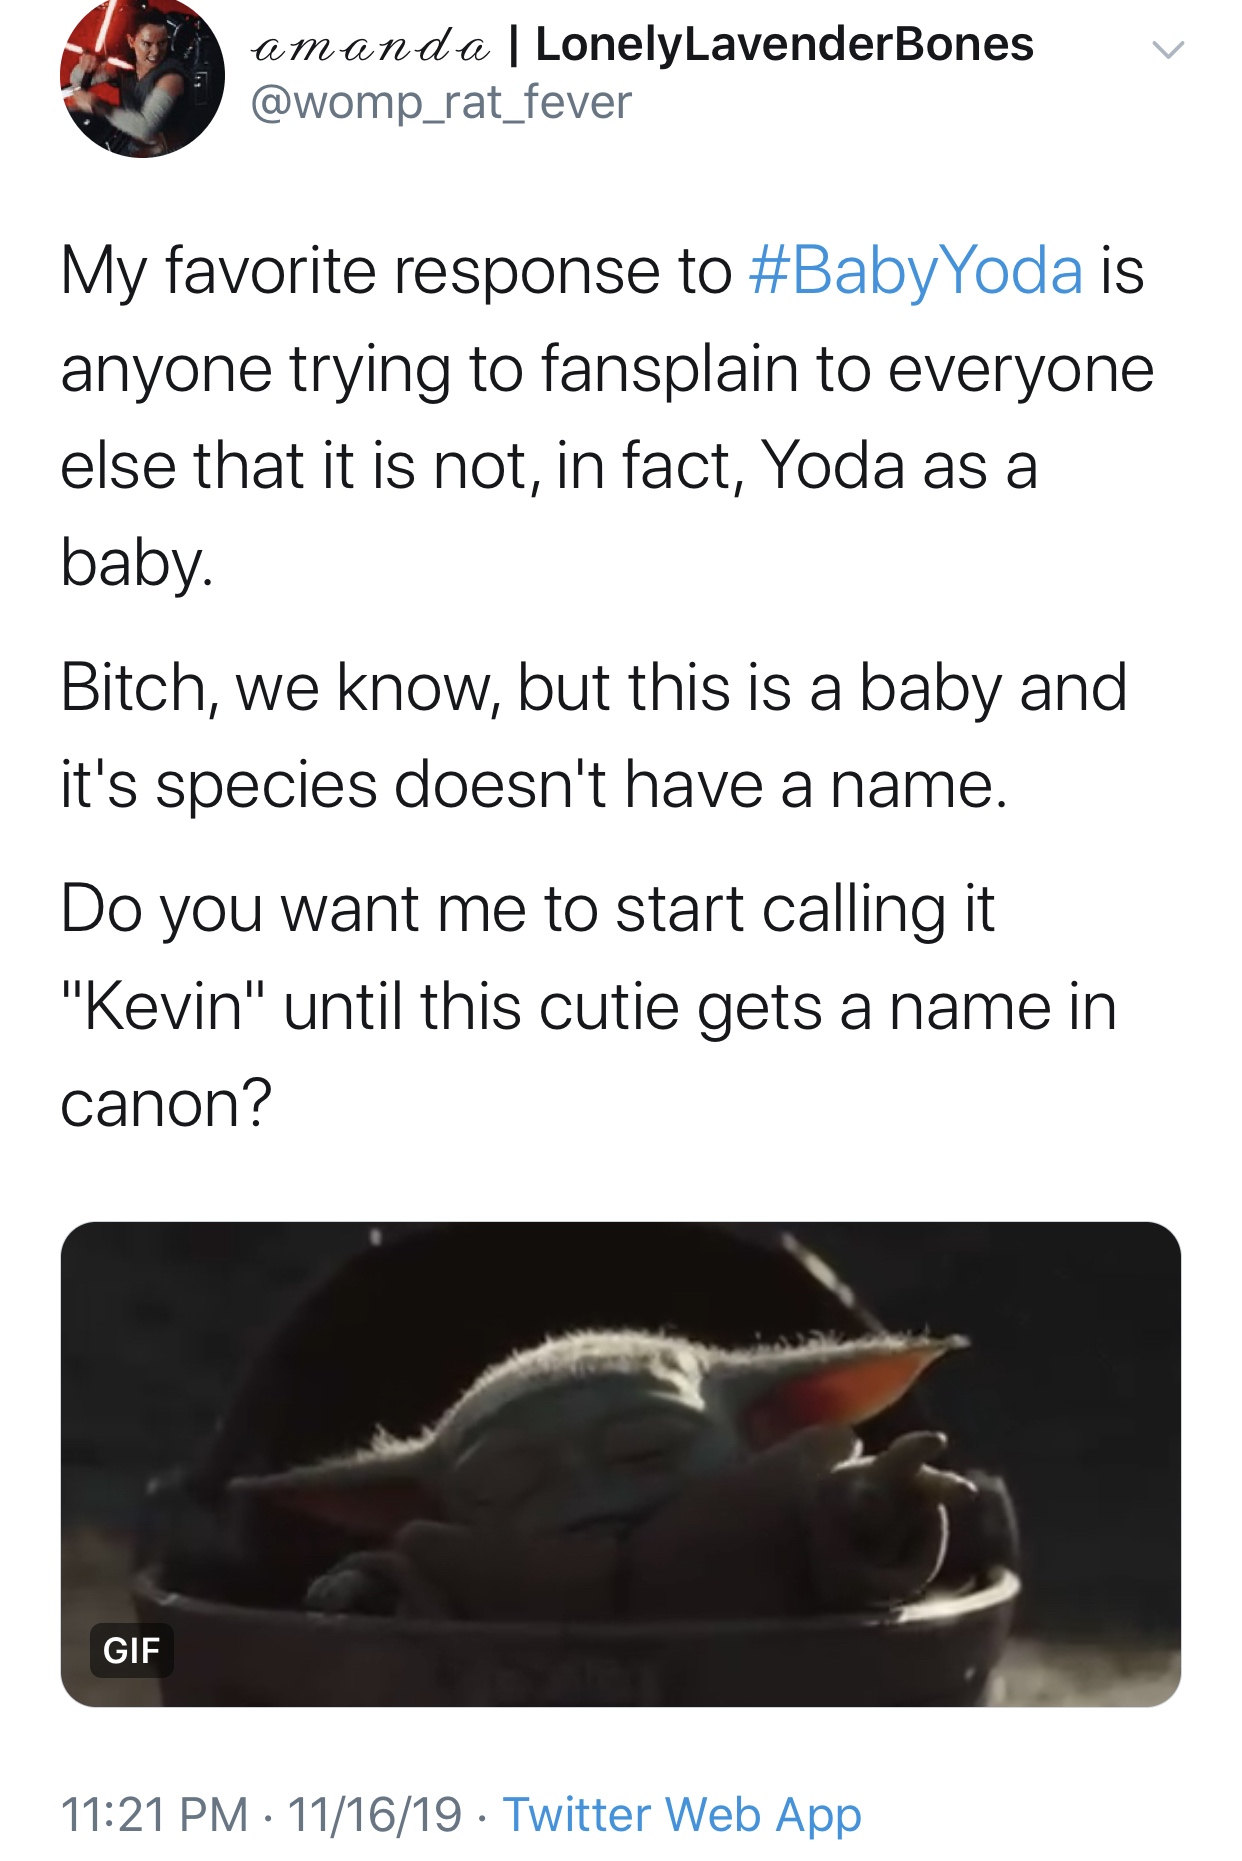 baby yoda meme - angle - amanda | Lonely LavenderBones My favorite response to is anyone trying to fansplain to everyone else that it is not, in fact, Yoda as a baby. Bitch, we know, but this is a baby and it's species doesn't have a name. Do you want me